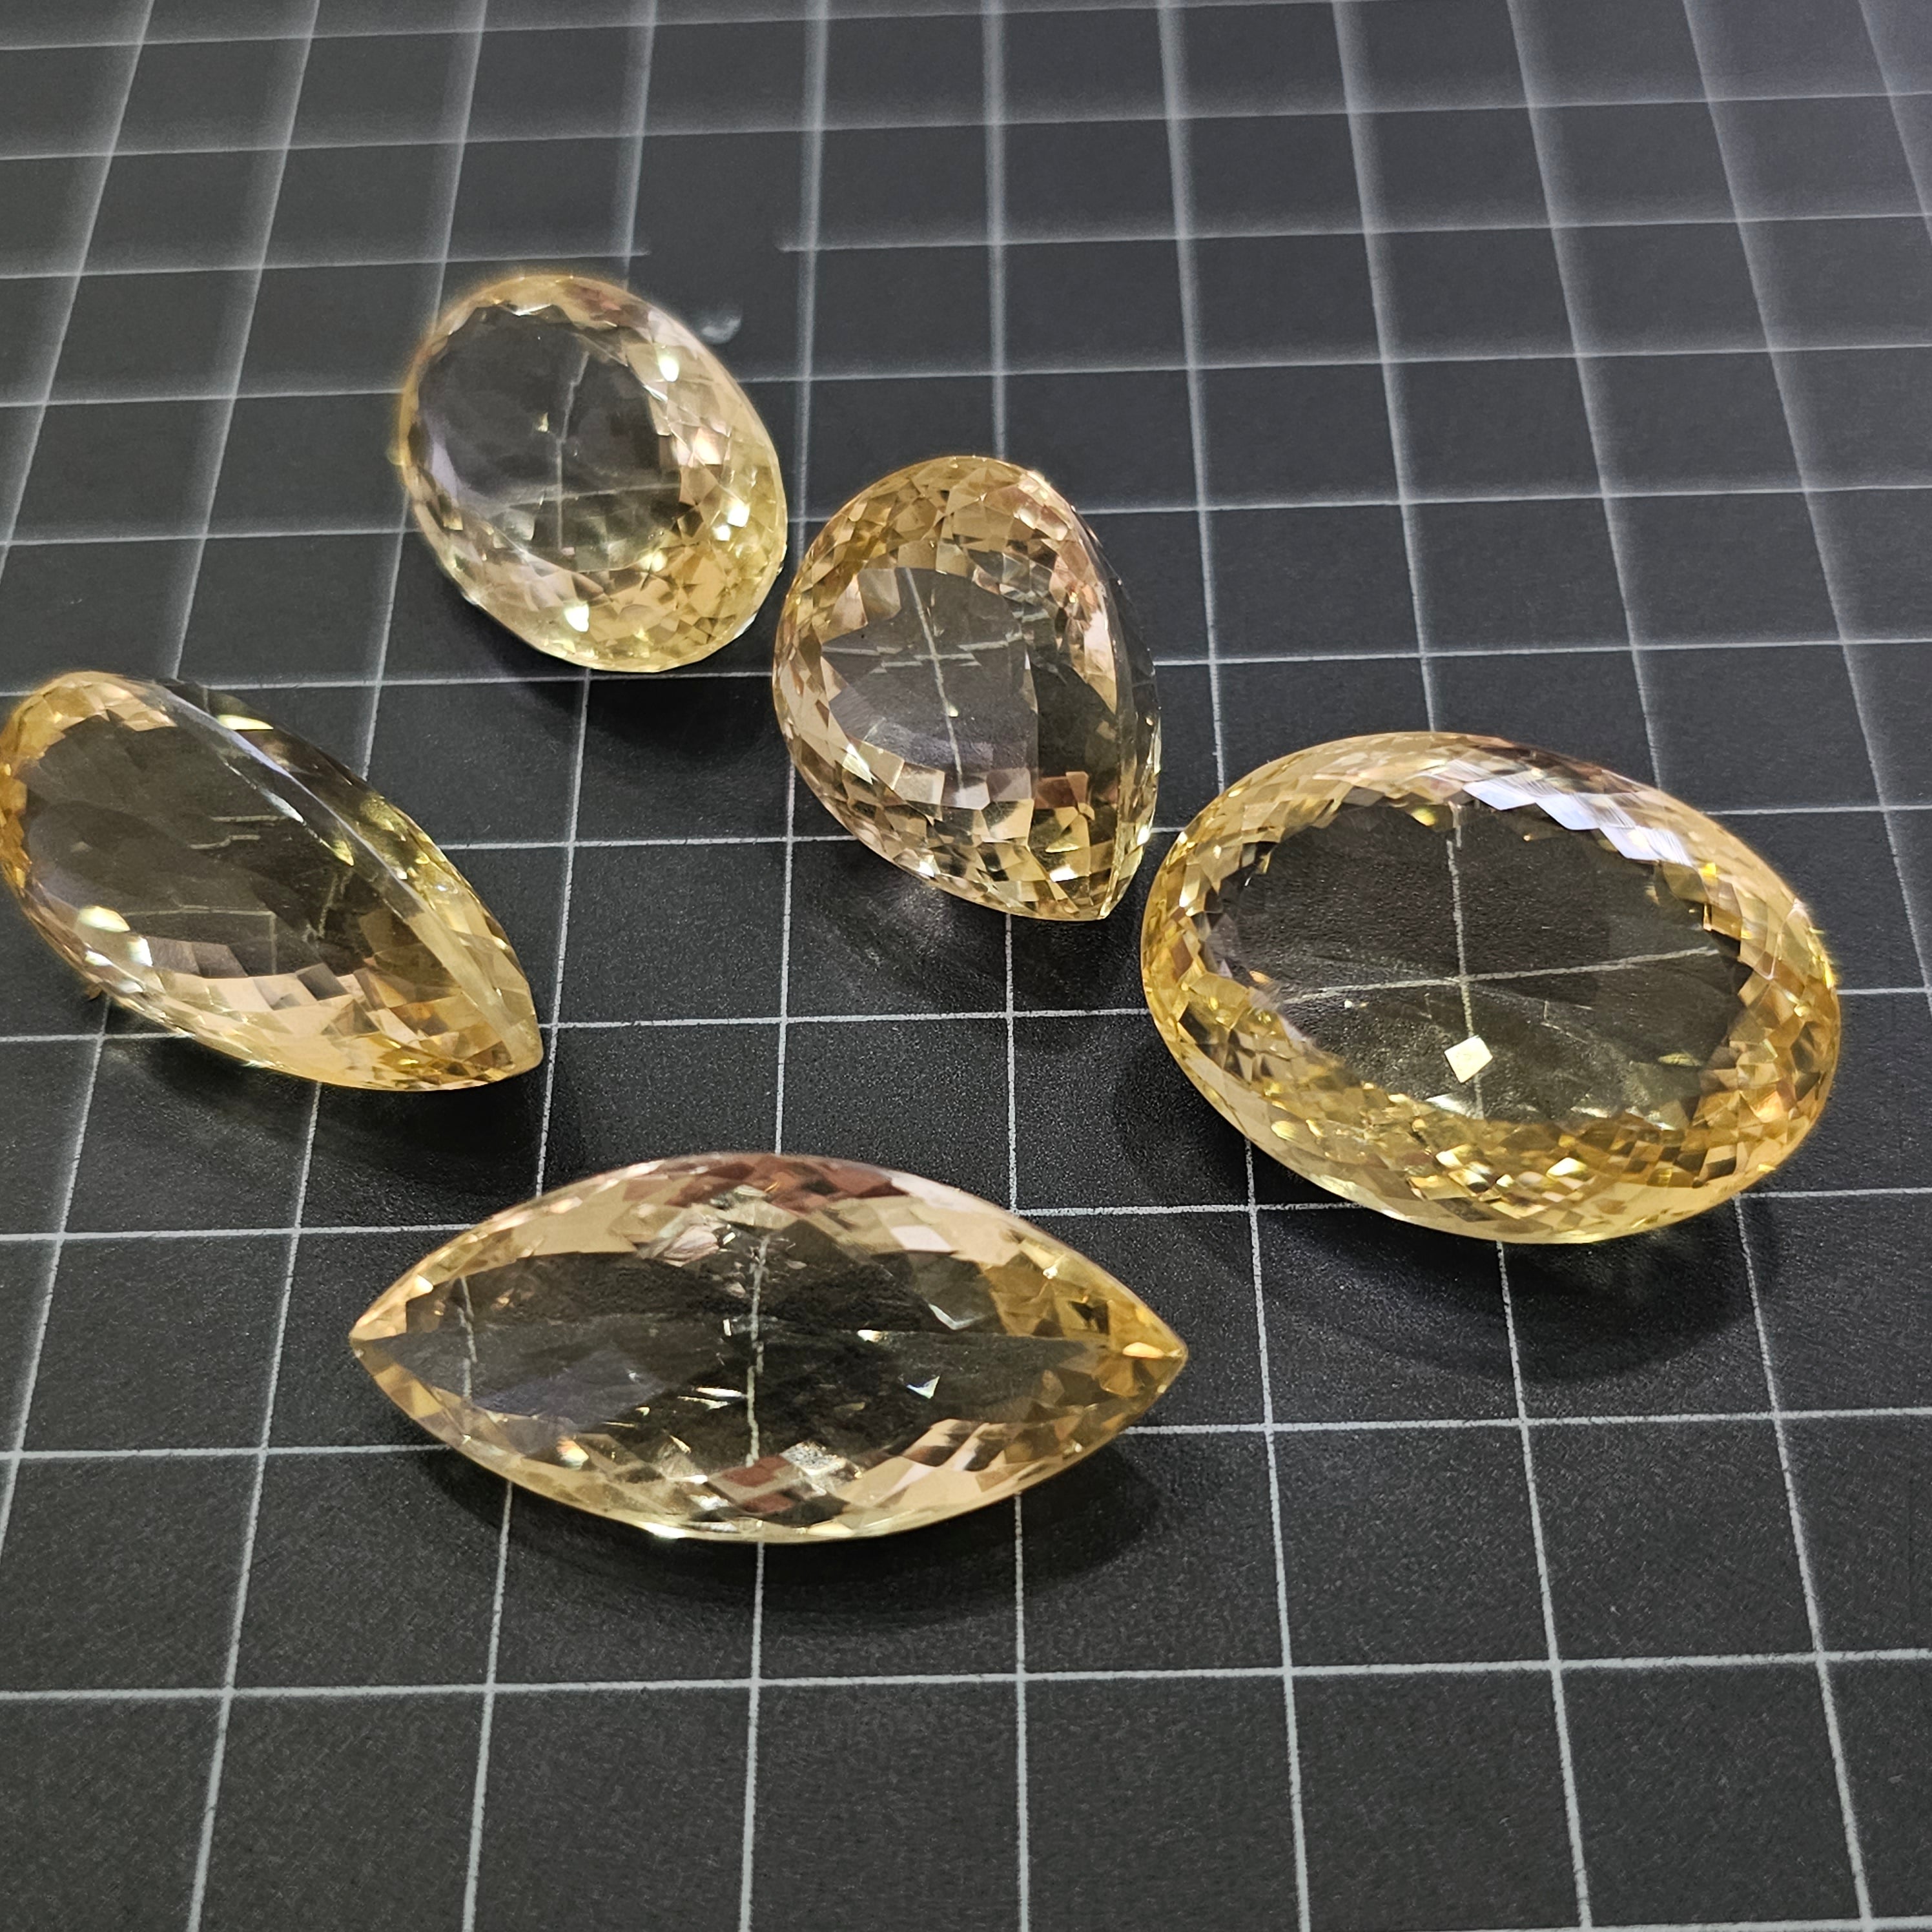 5 Pcs Natural Citrine Faceted Gemstone Shape: Pear & Oval | Size: 12-32mm - The LabradoriteKing